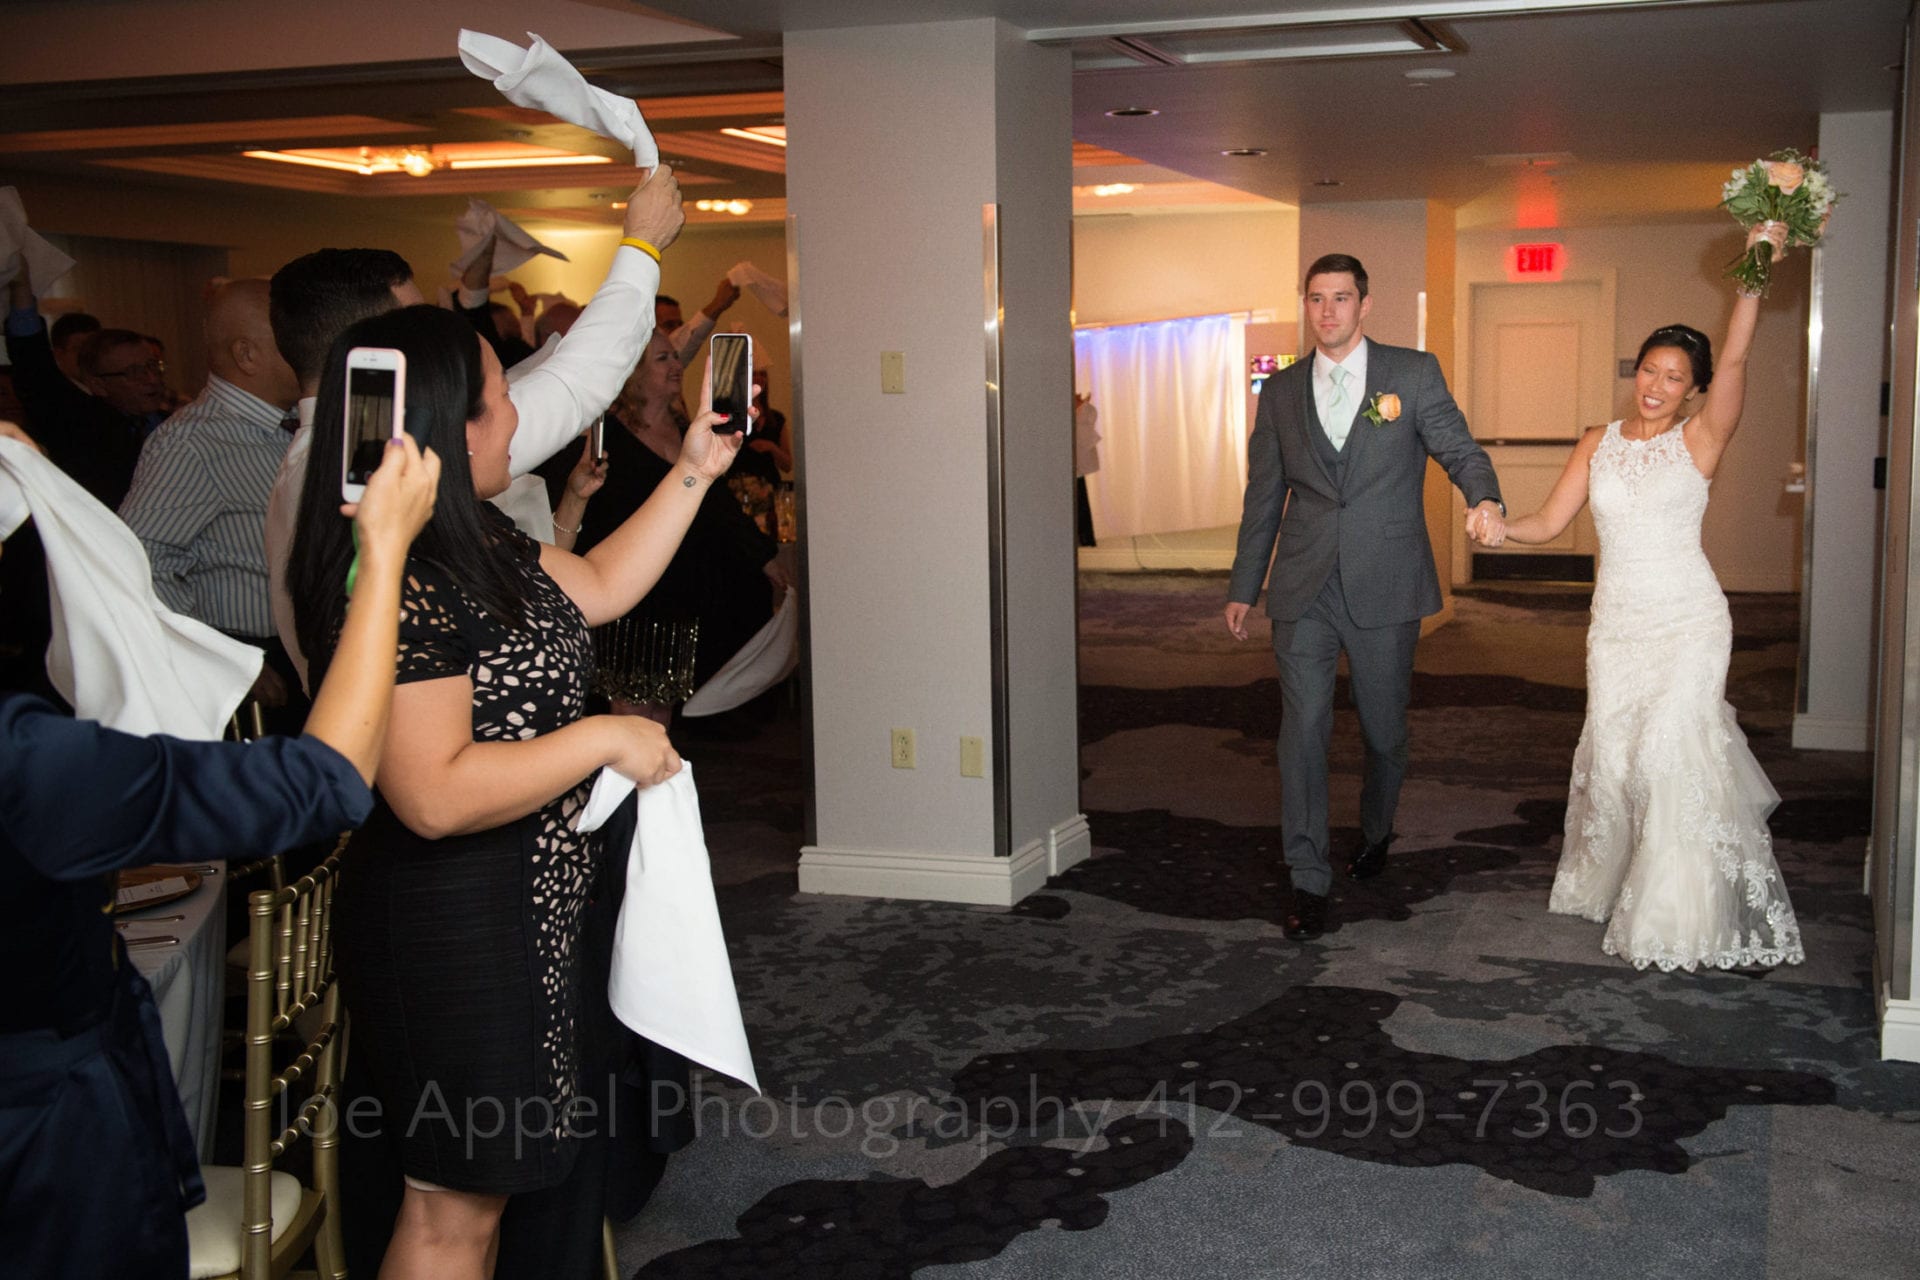 guests cheer and take photos as the bride and grrom enter the reception area